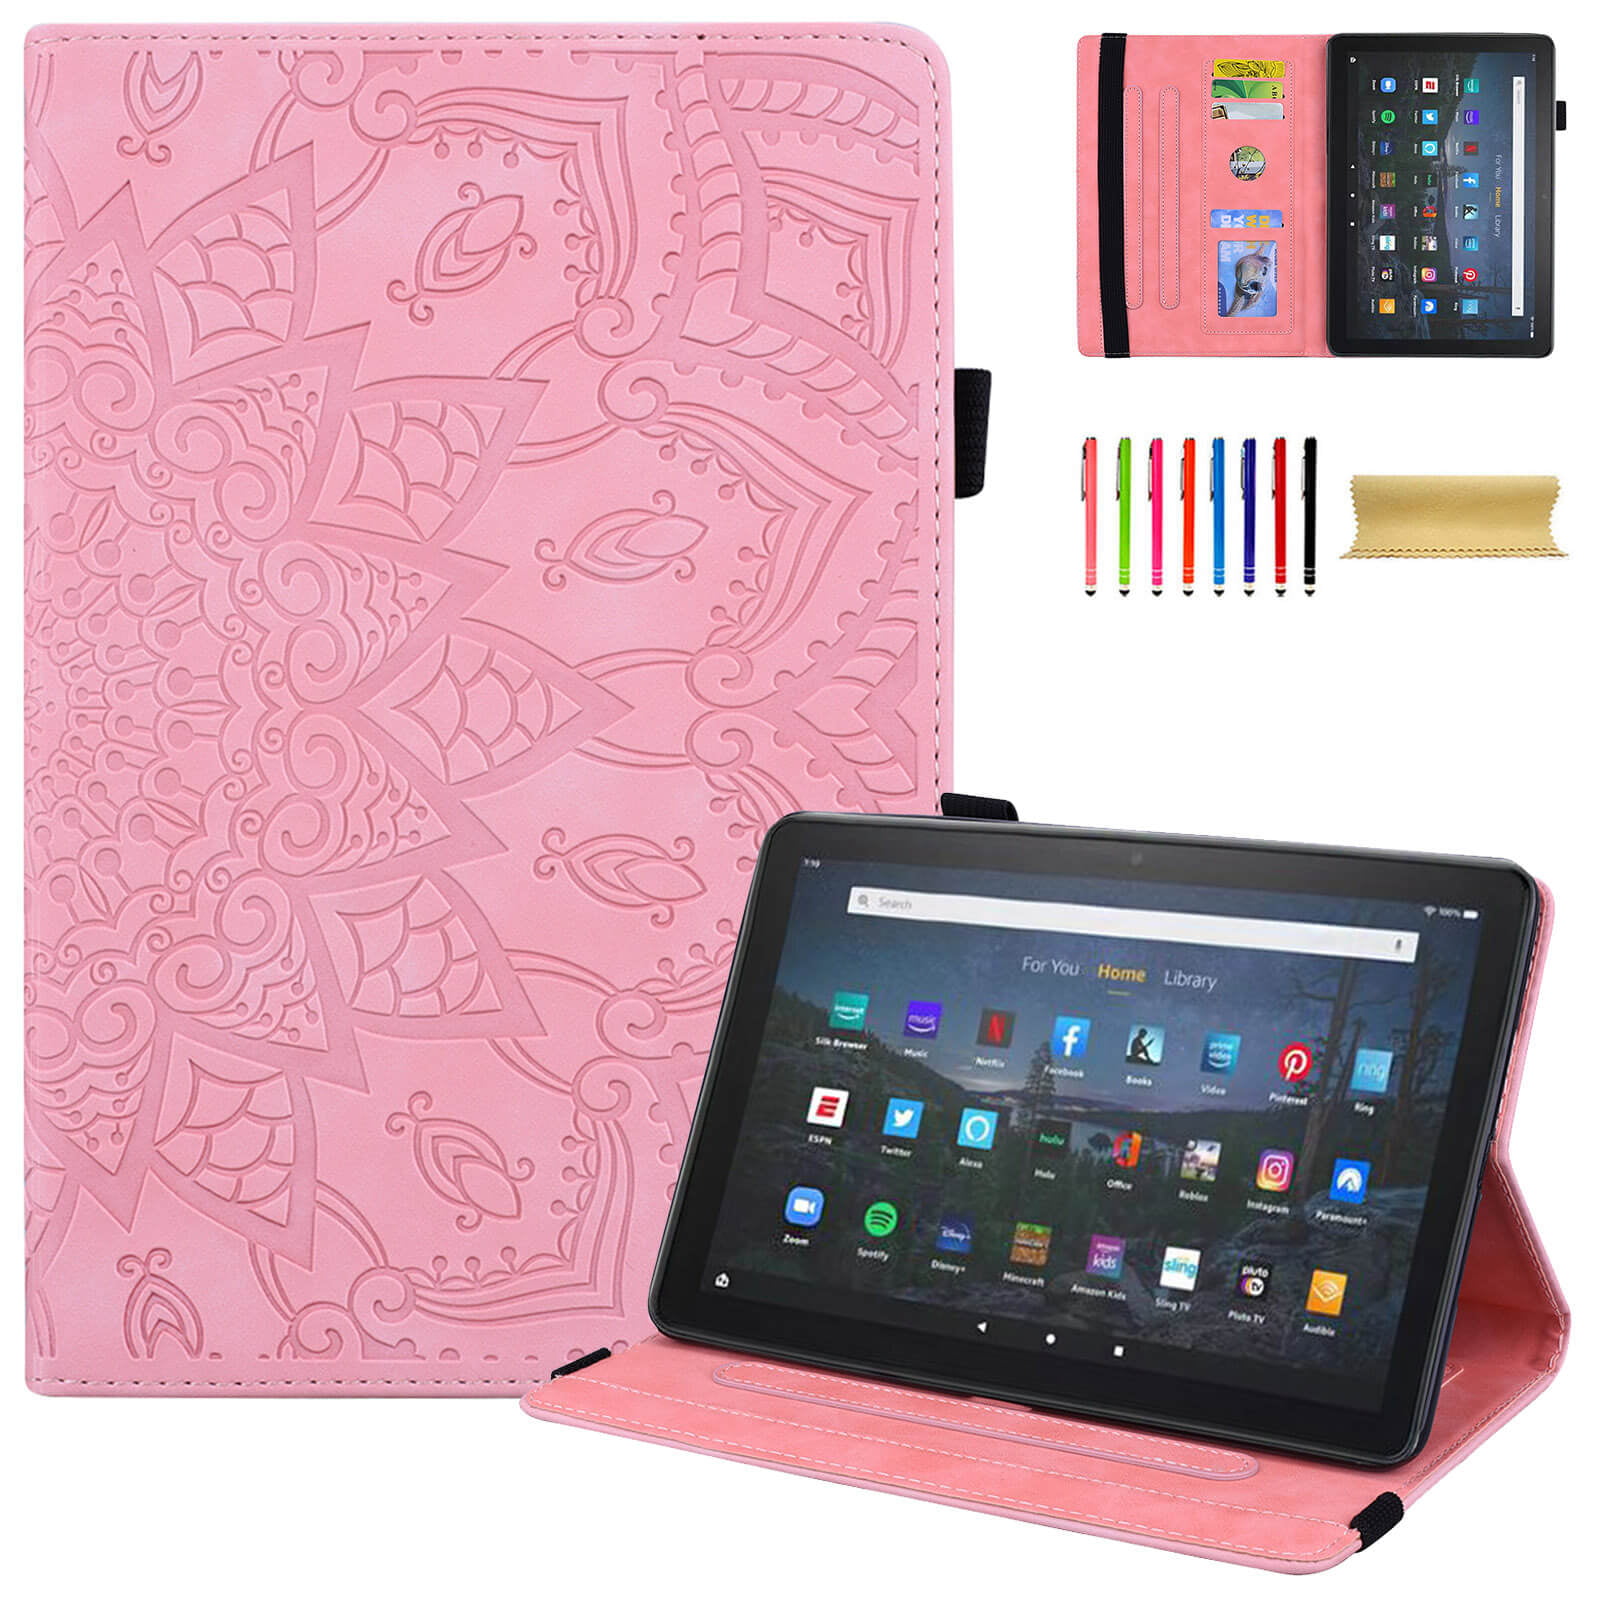 Case for All-New Fire HD 10 & HD 10 Plus 10.1" Tablet (11th Generation